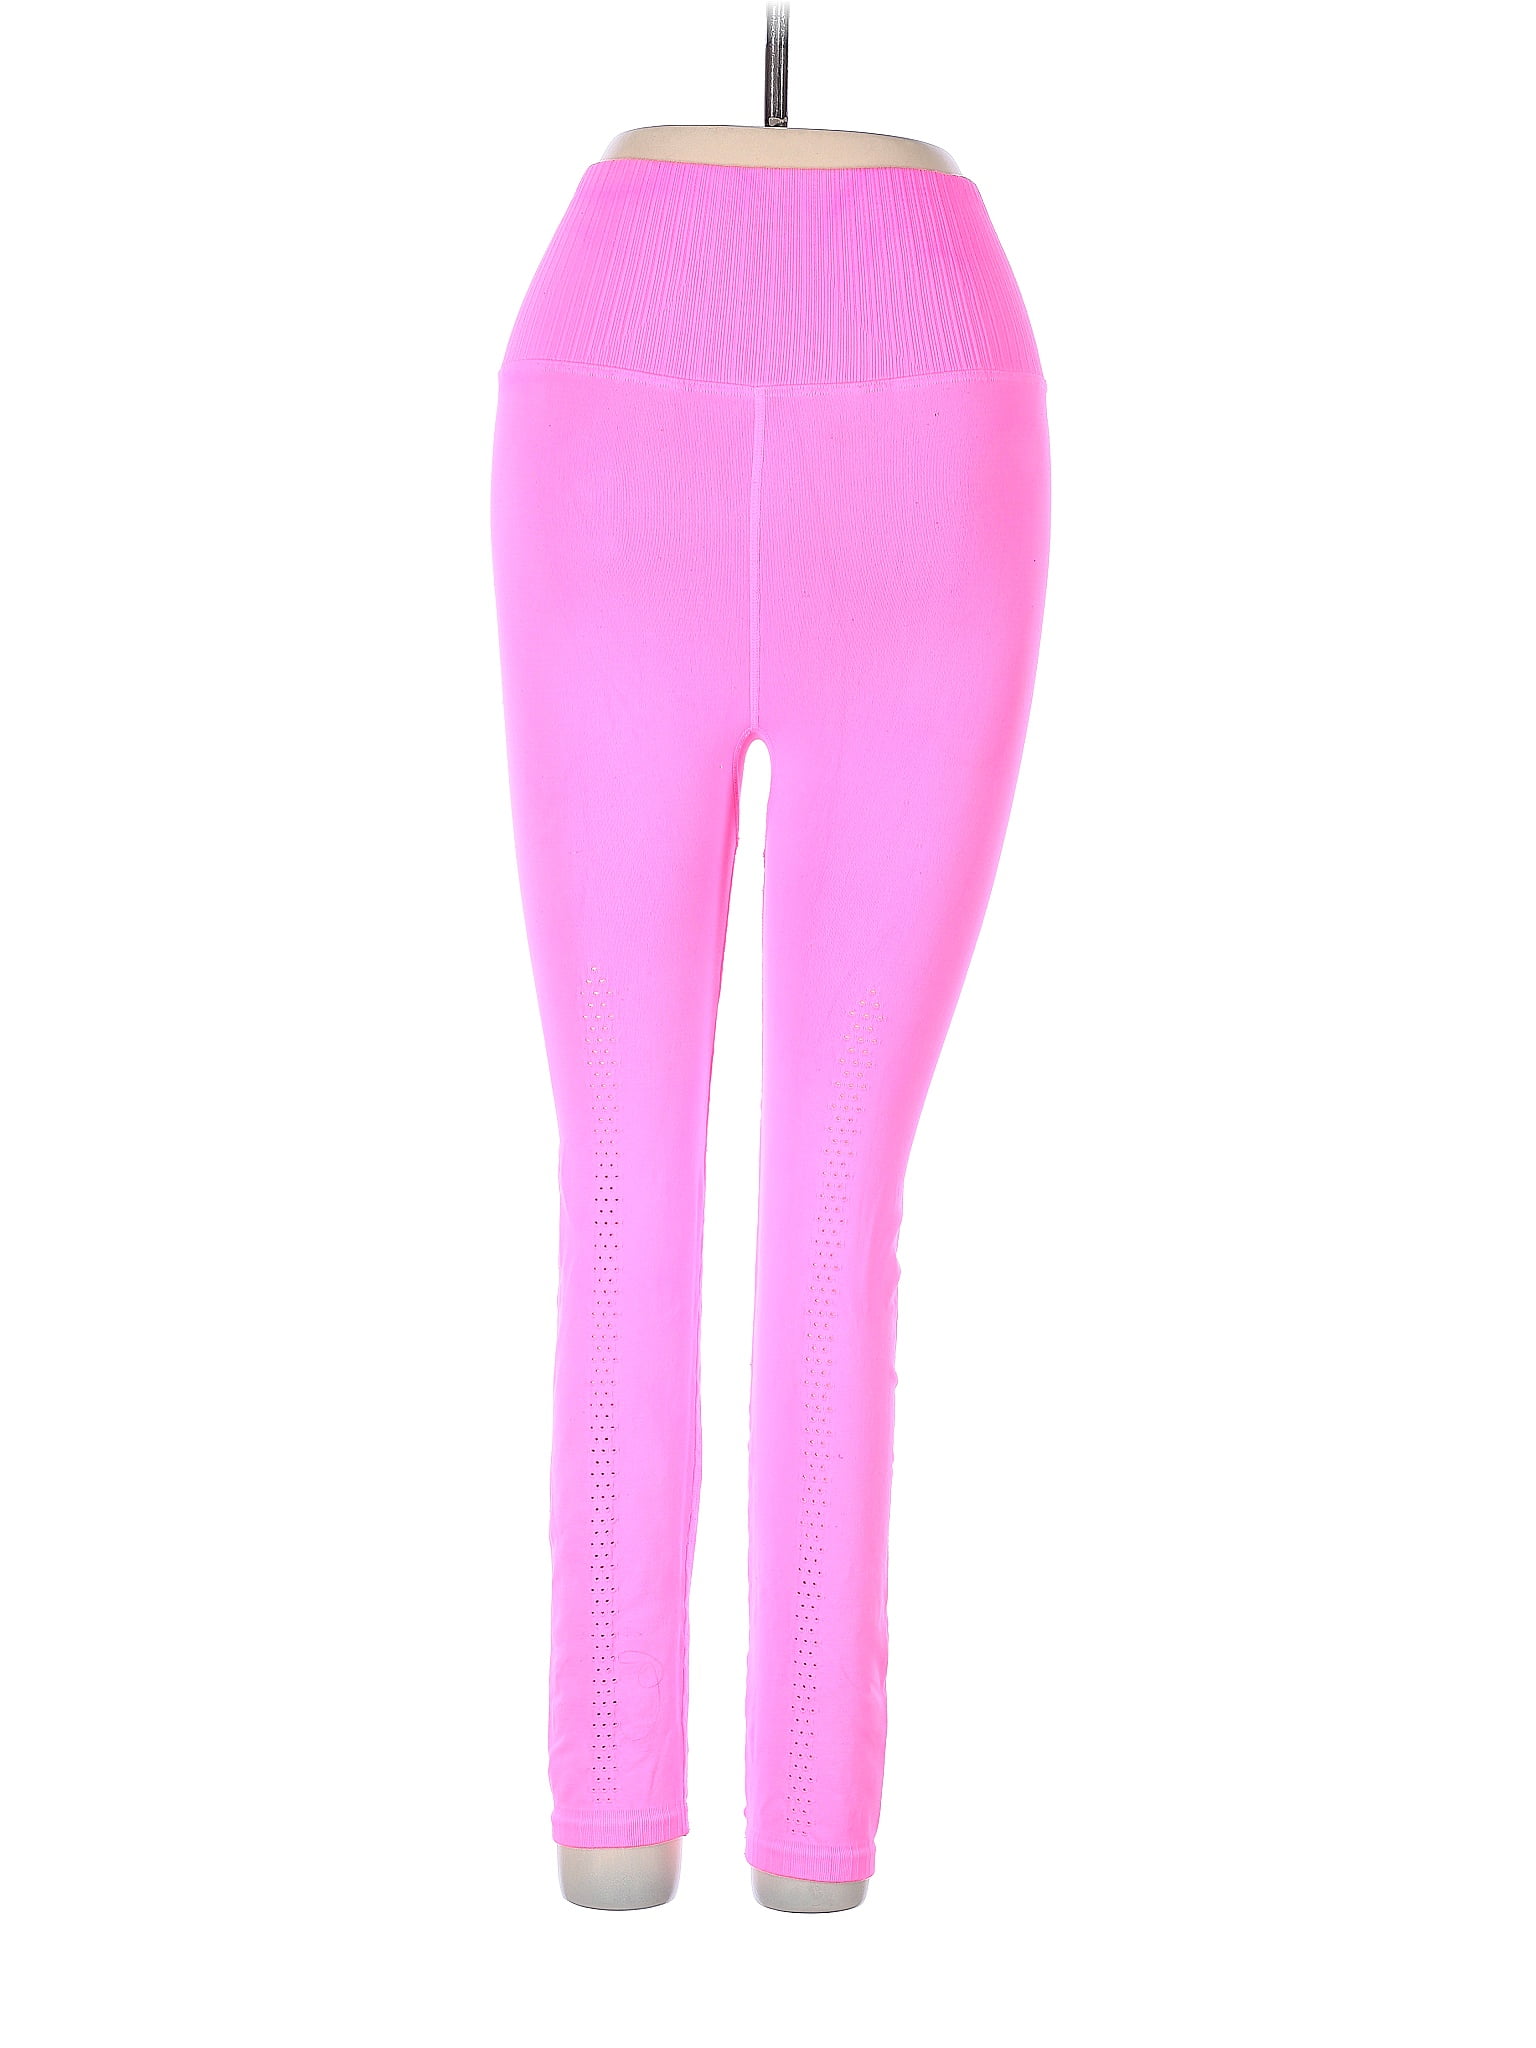 FP Movement Pink Leggings Size XS - 63% off